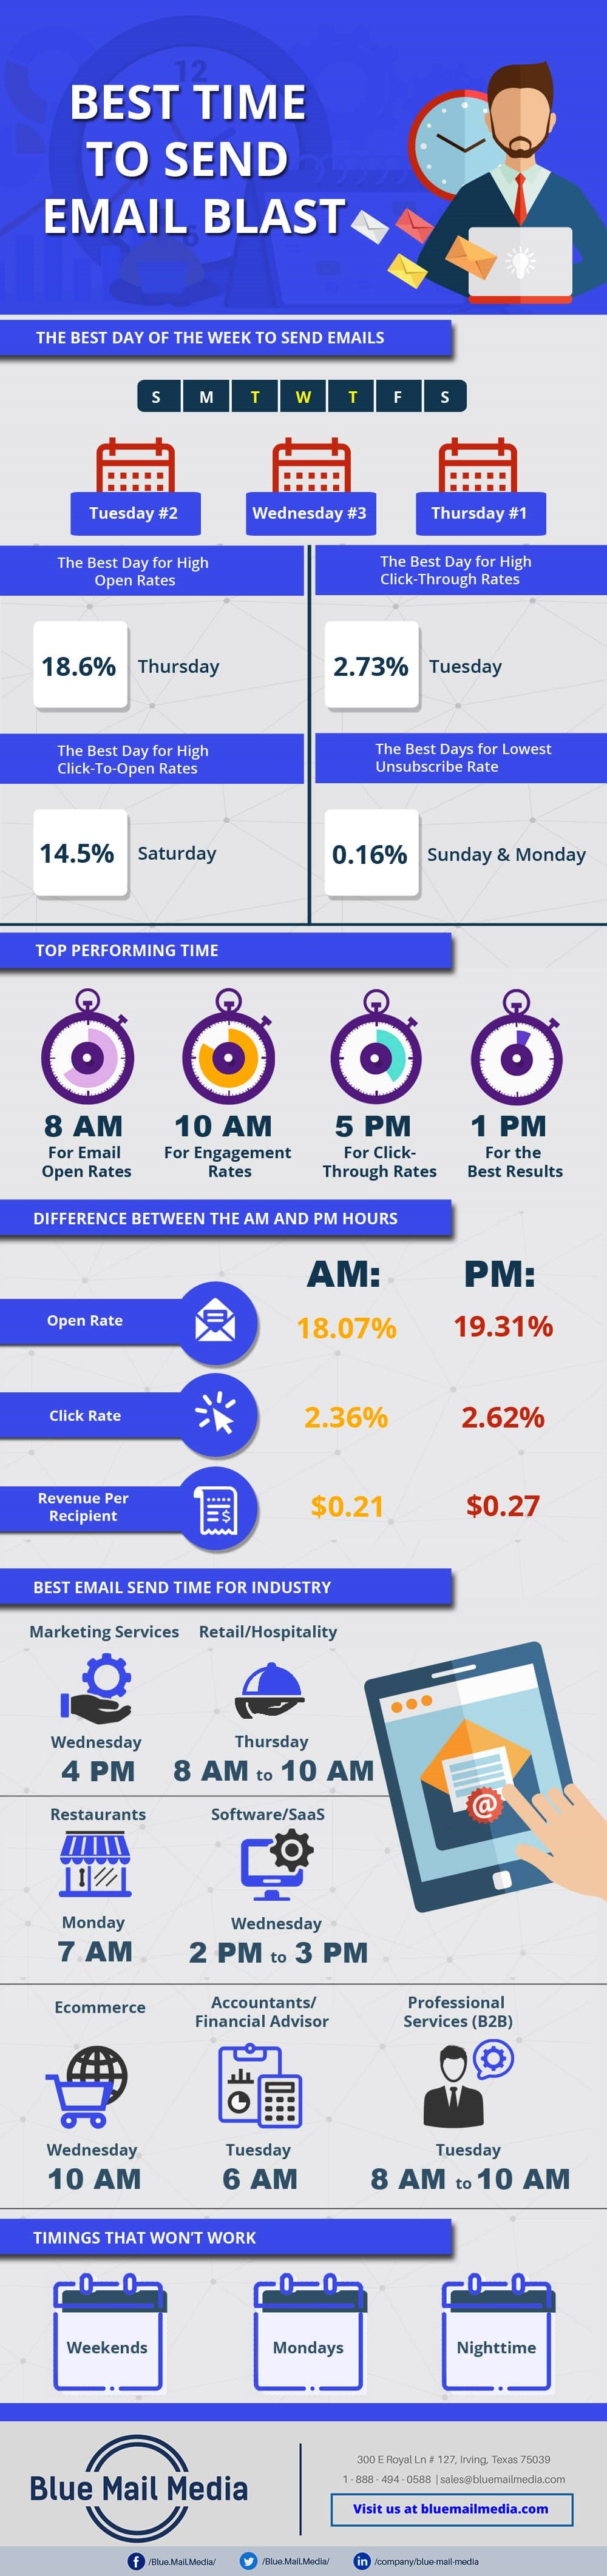 Infographic On Best Time to Send Email Blast by Blue Mail Media